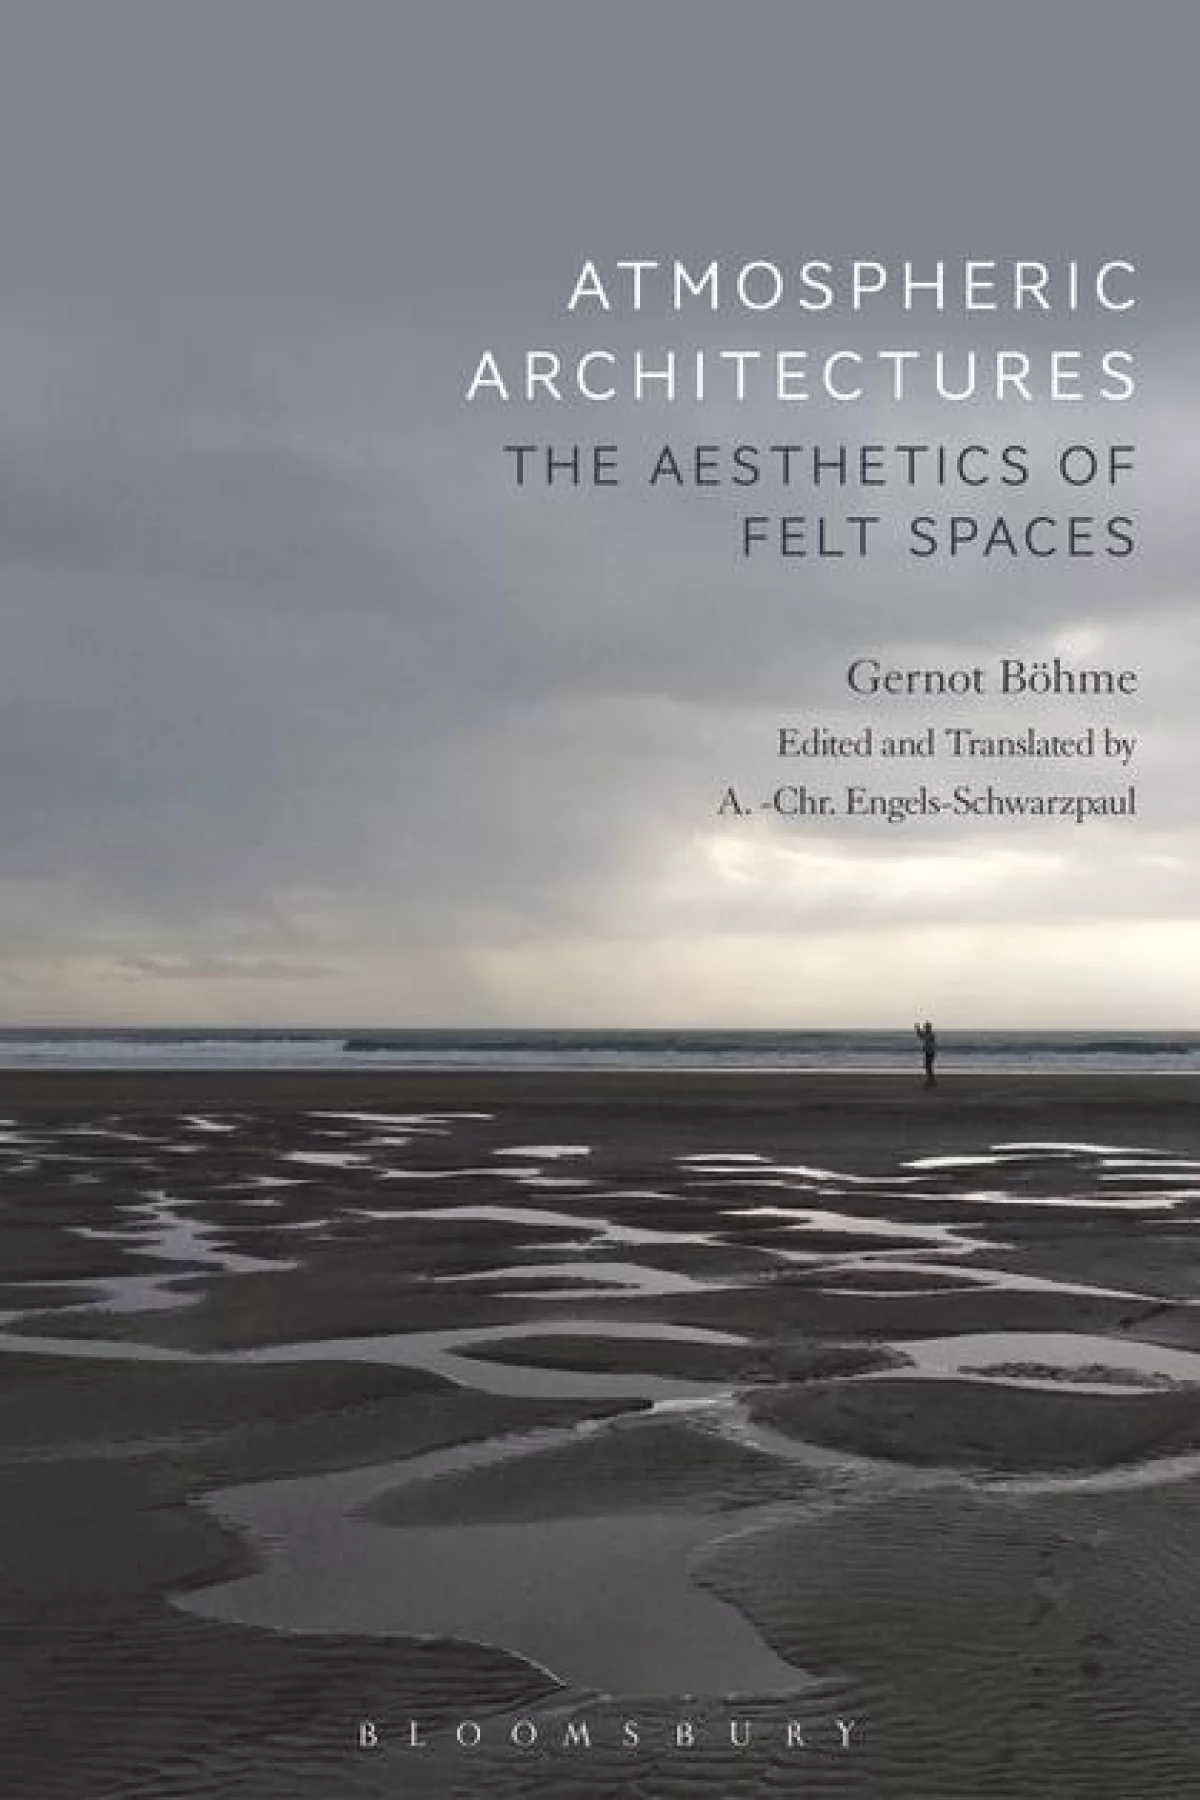 Atmospheric architectures ed translated by tina engels 01